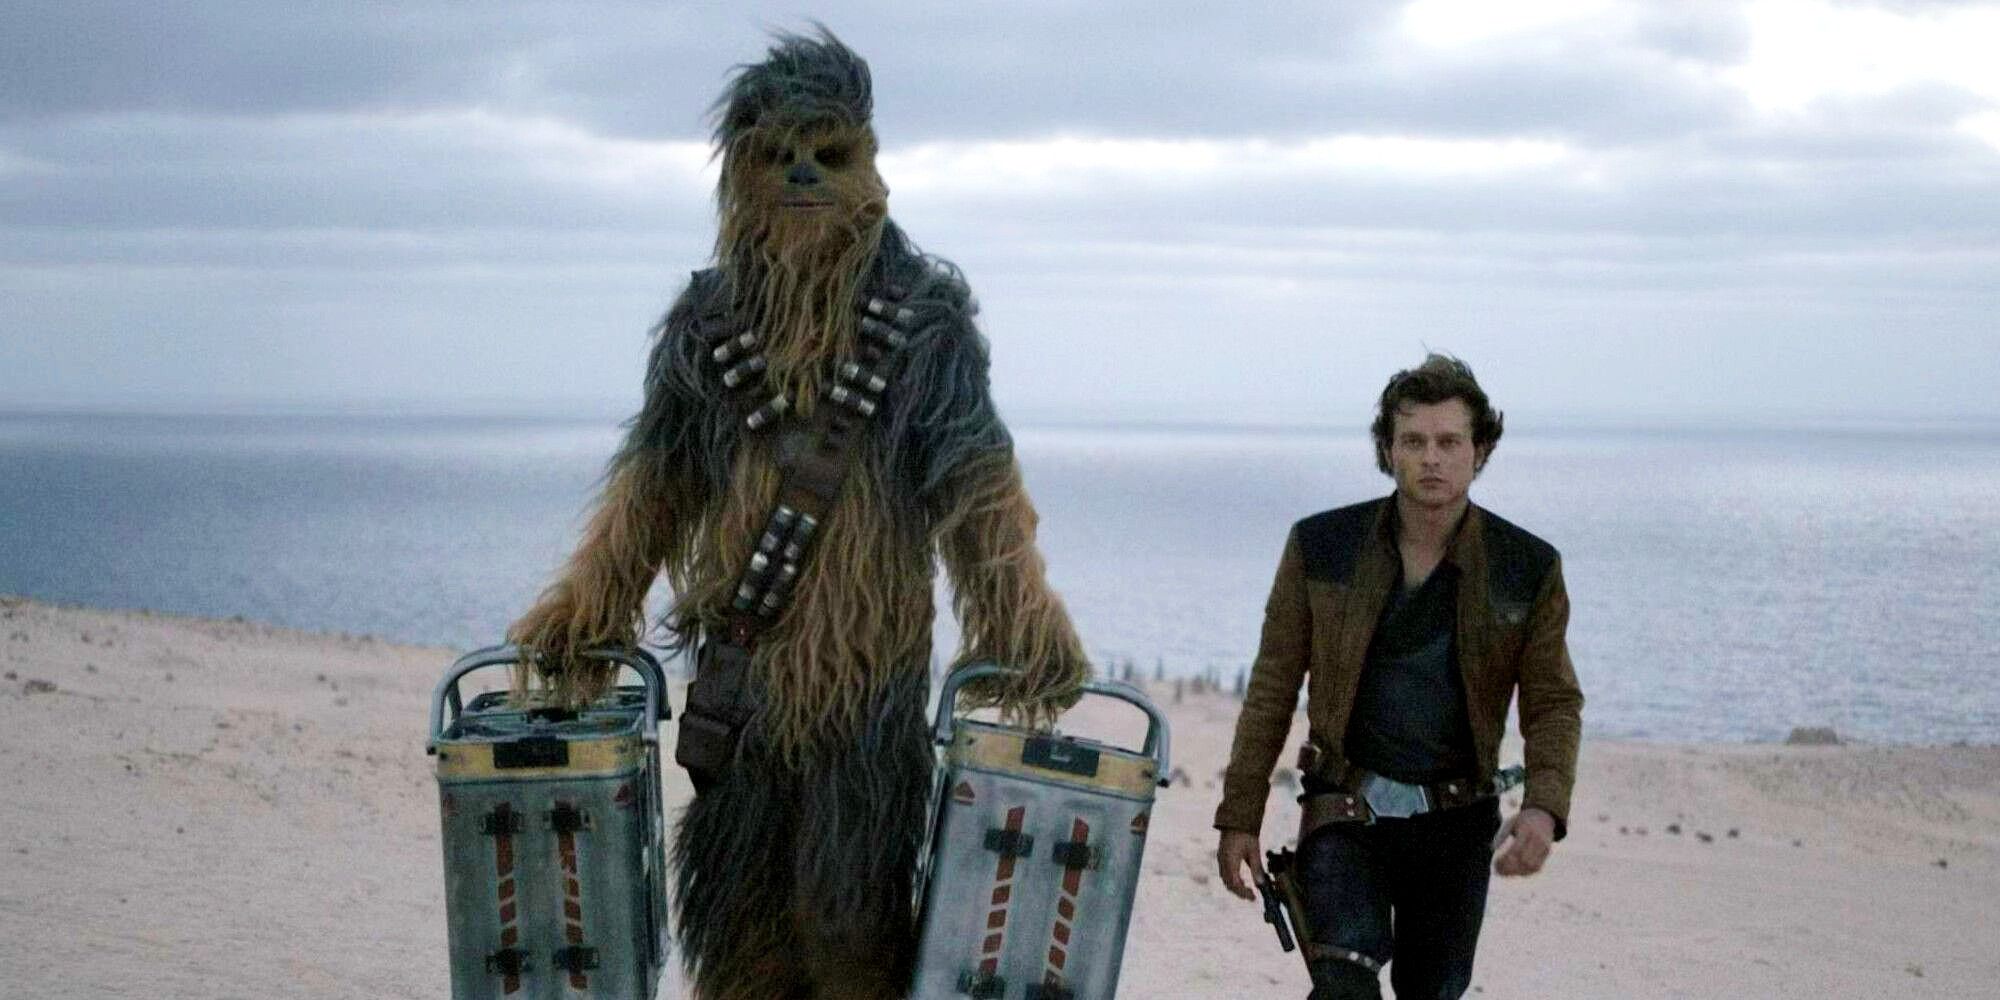 Chewbecca and Han walking in the beach in Solo A Star Wars Story